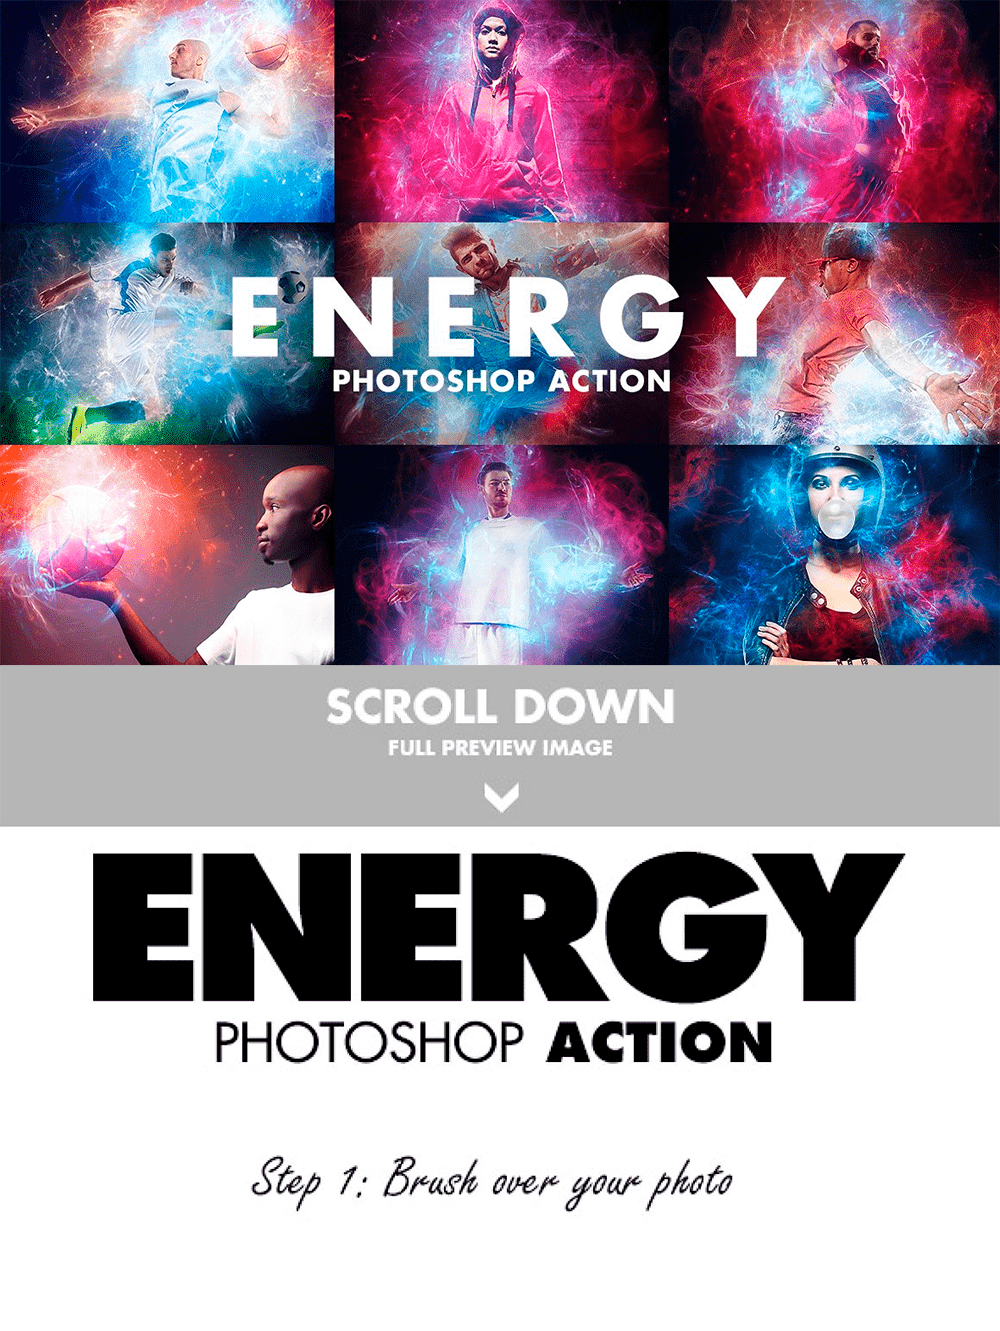 Energy photoshop action, picture for pinterest 1000x1331.